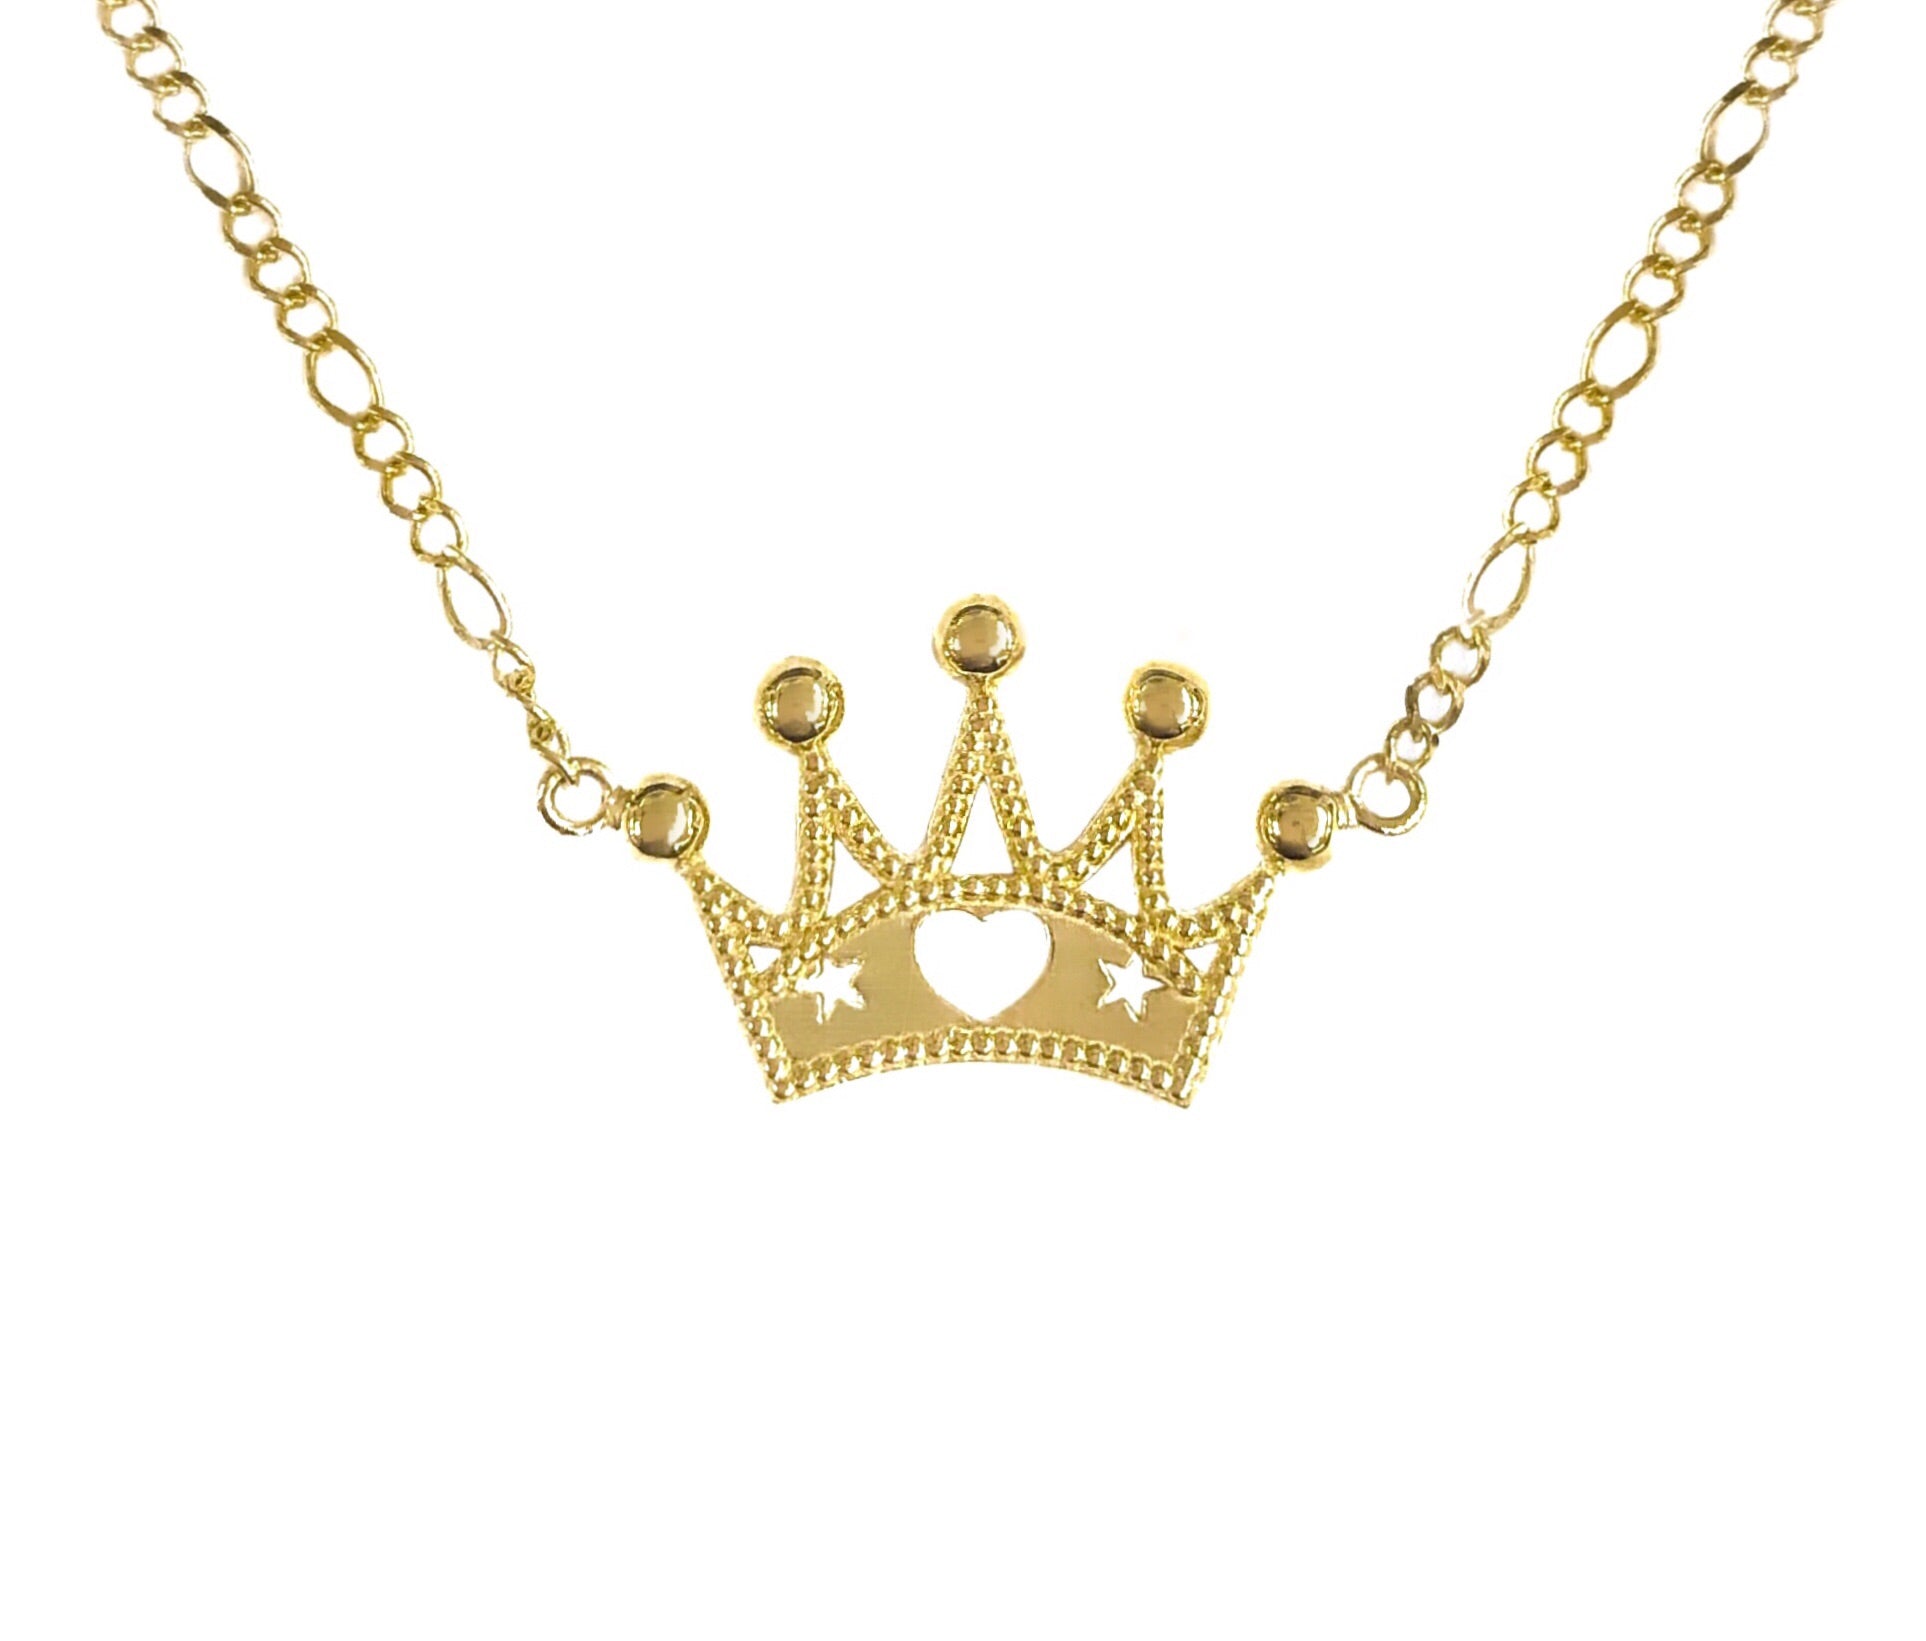 14K YELLOW GOLD CROWN PRINCESS PLEASE, NECKLACE